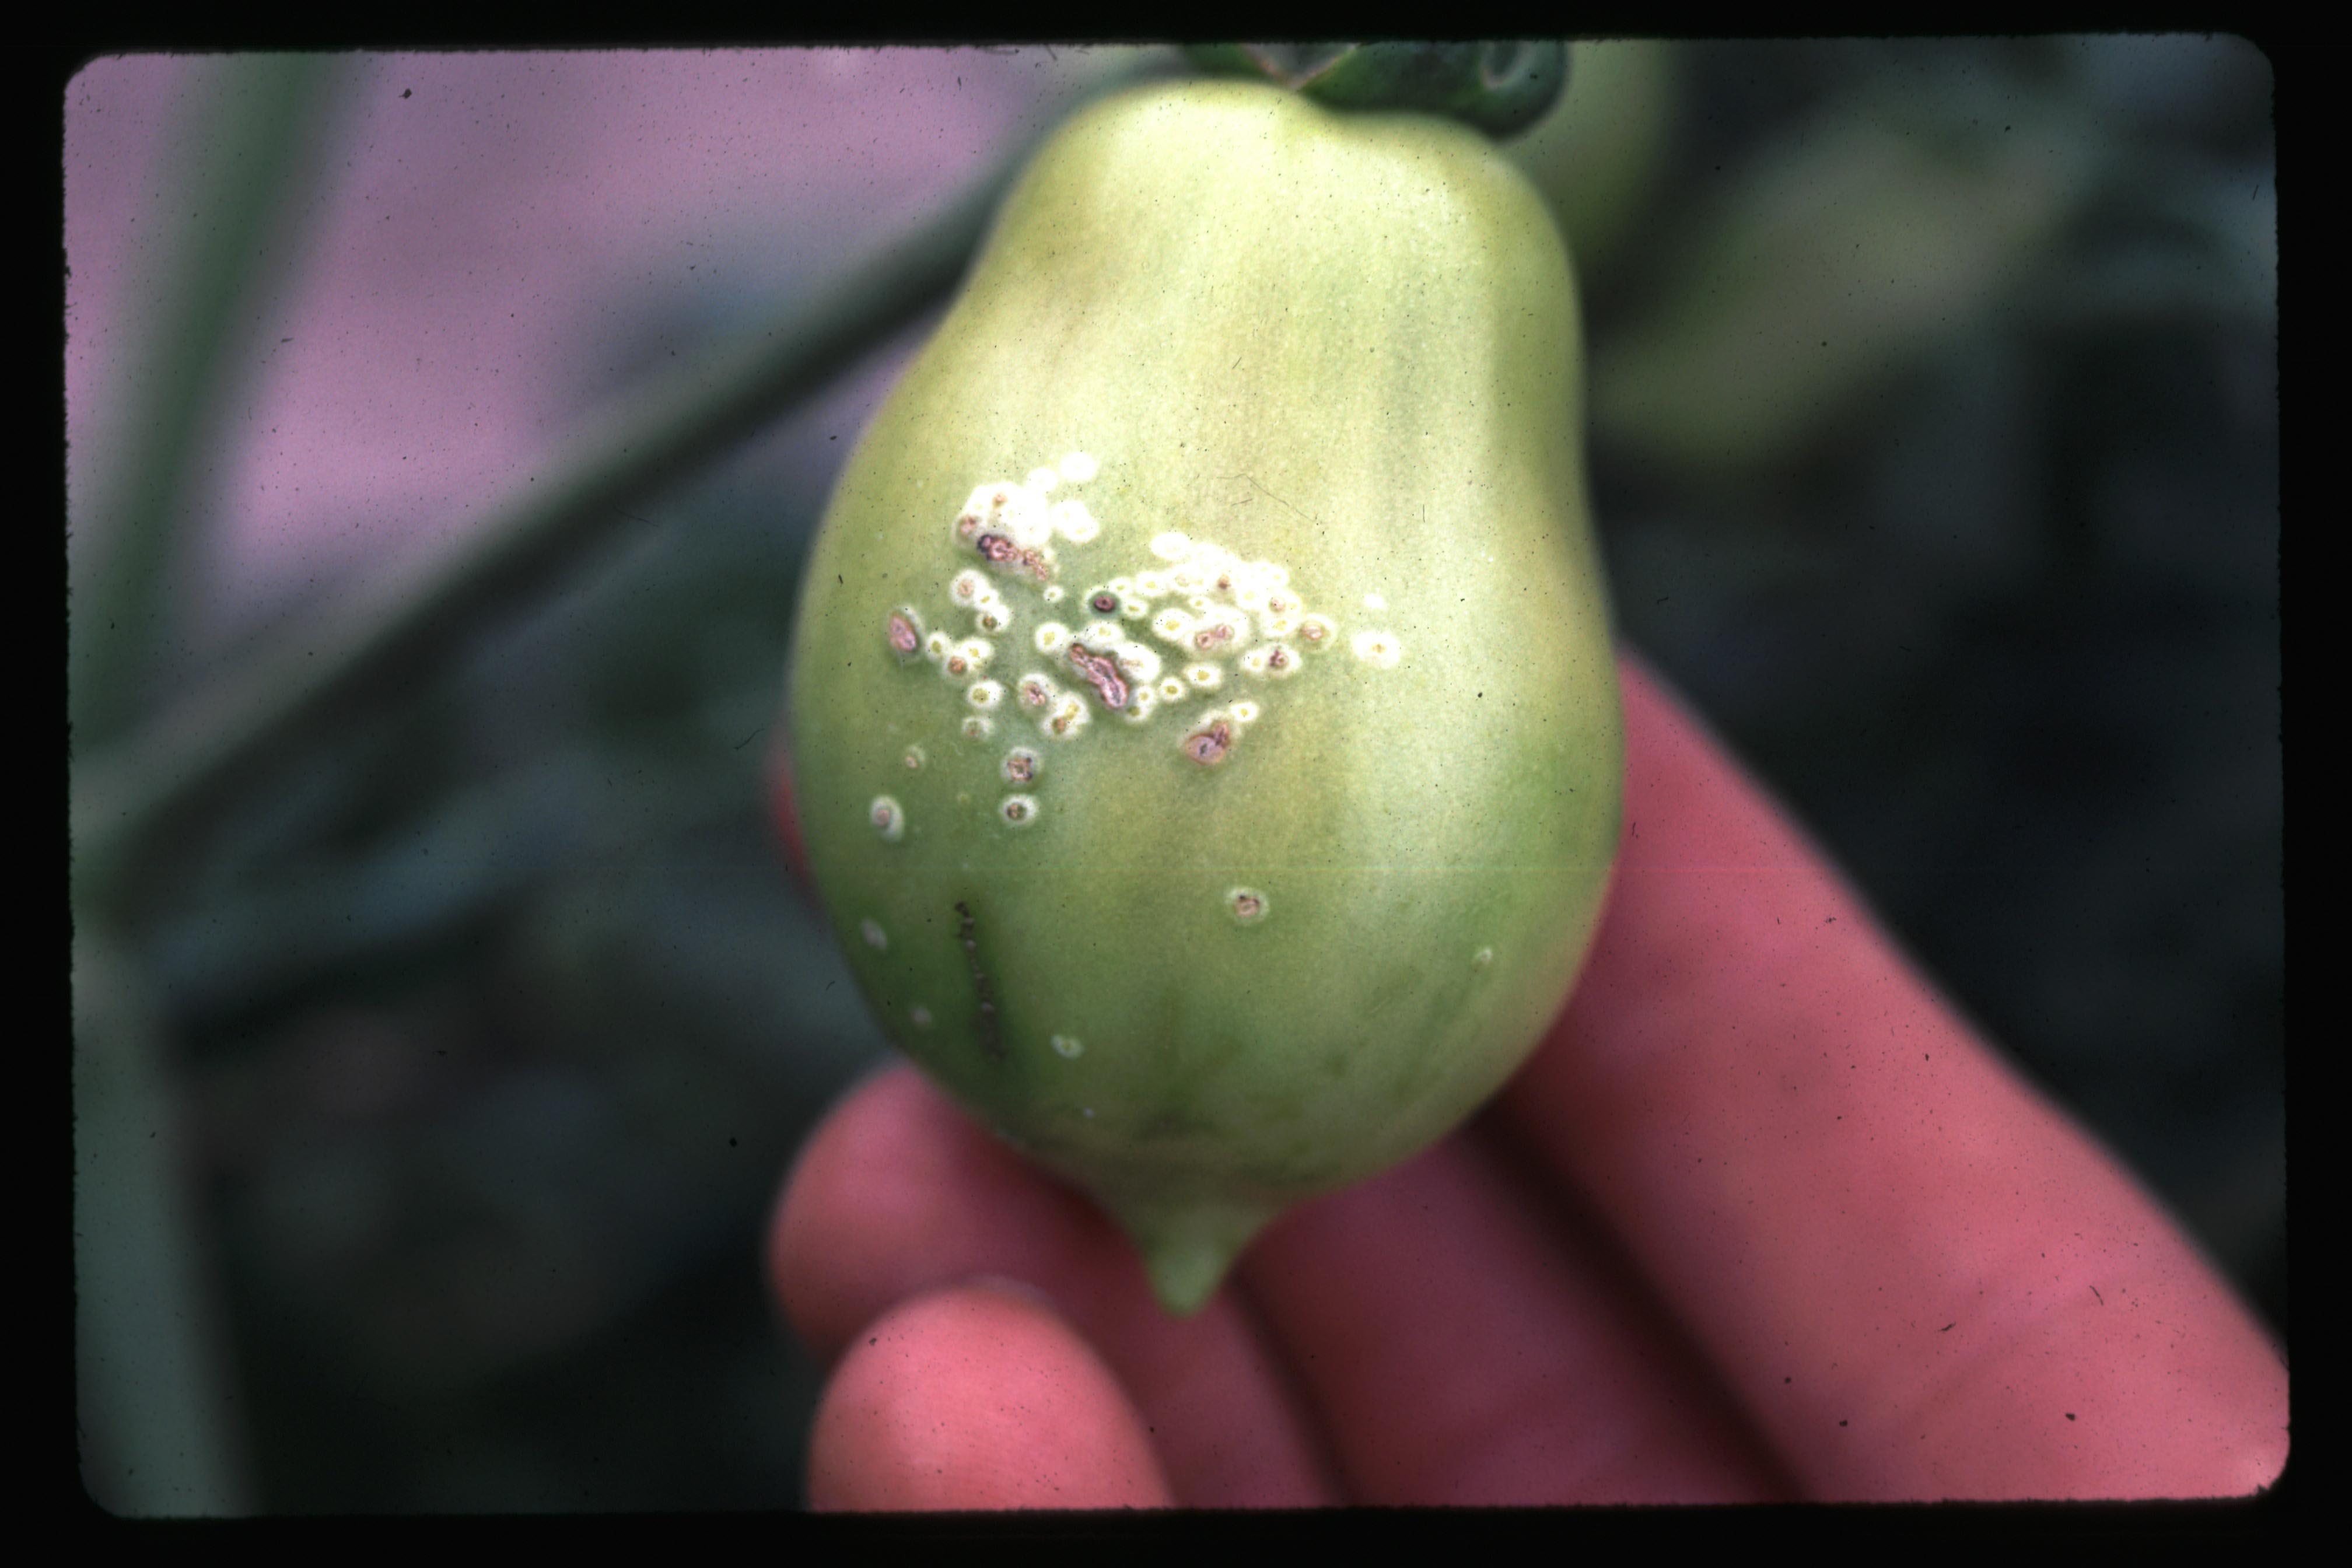 Bacterial canker lesions on tomato fruit